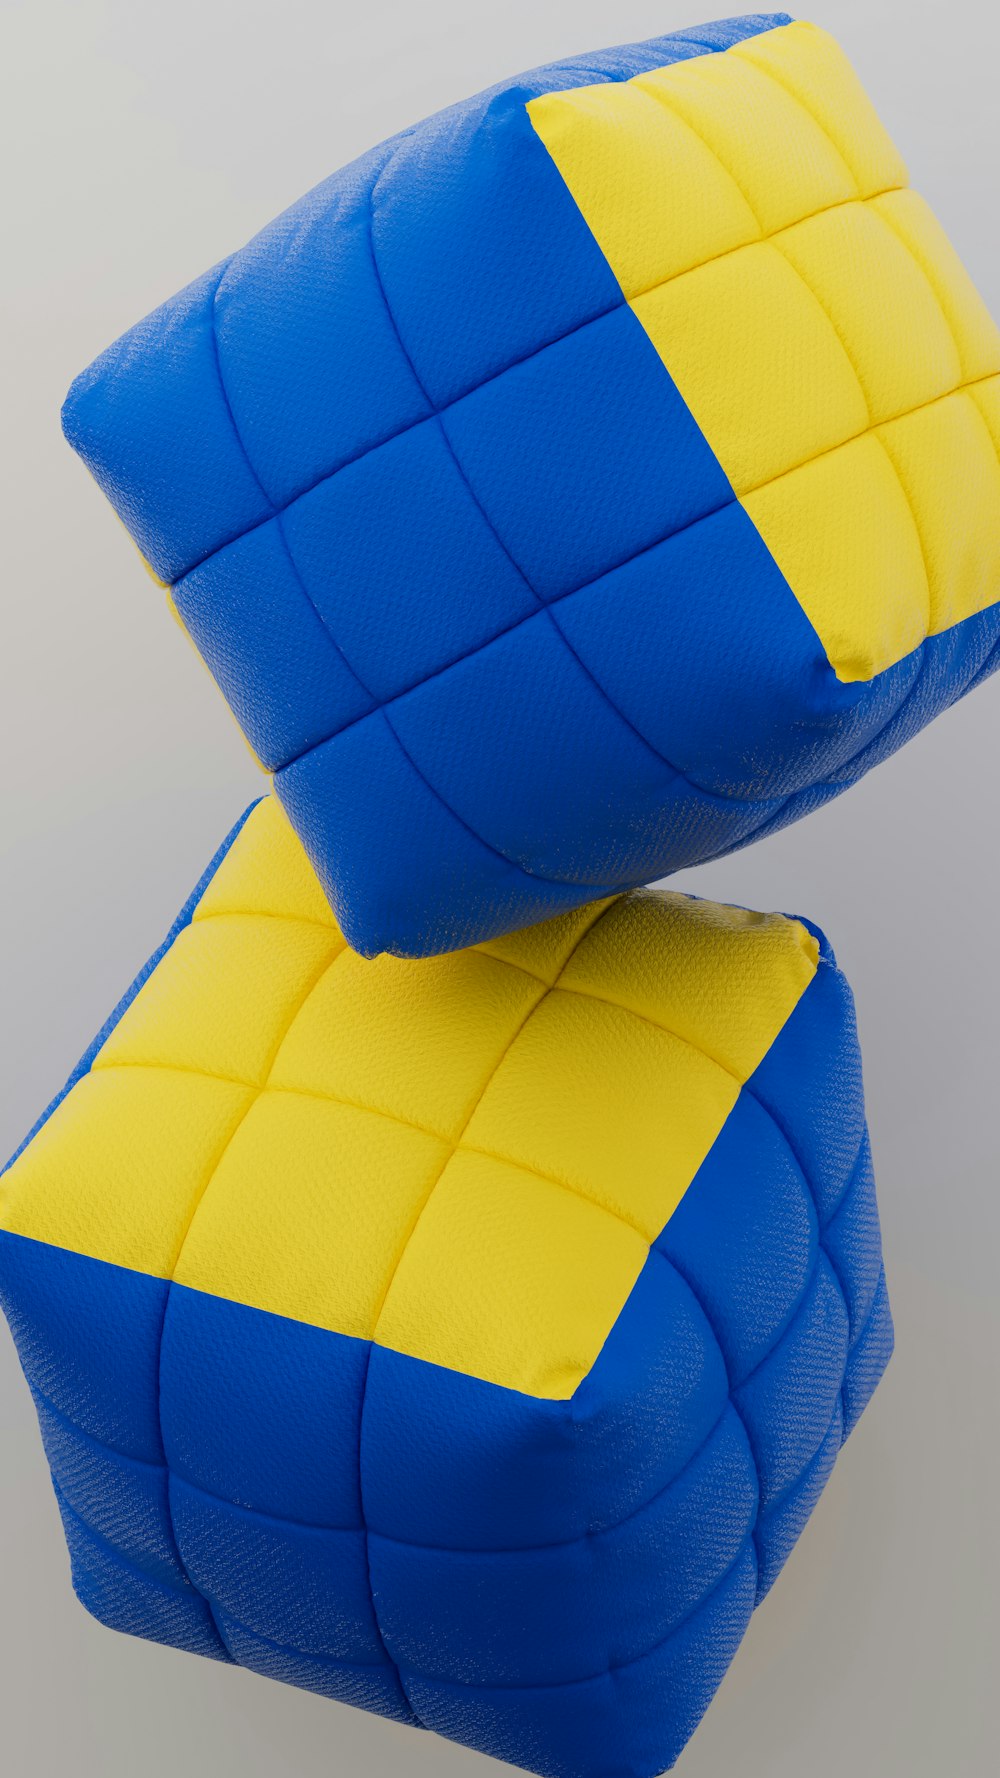 two blue and yellow cushions sitting on top of each other